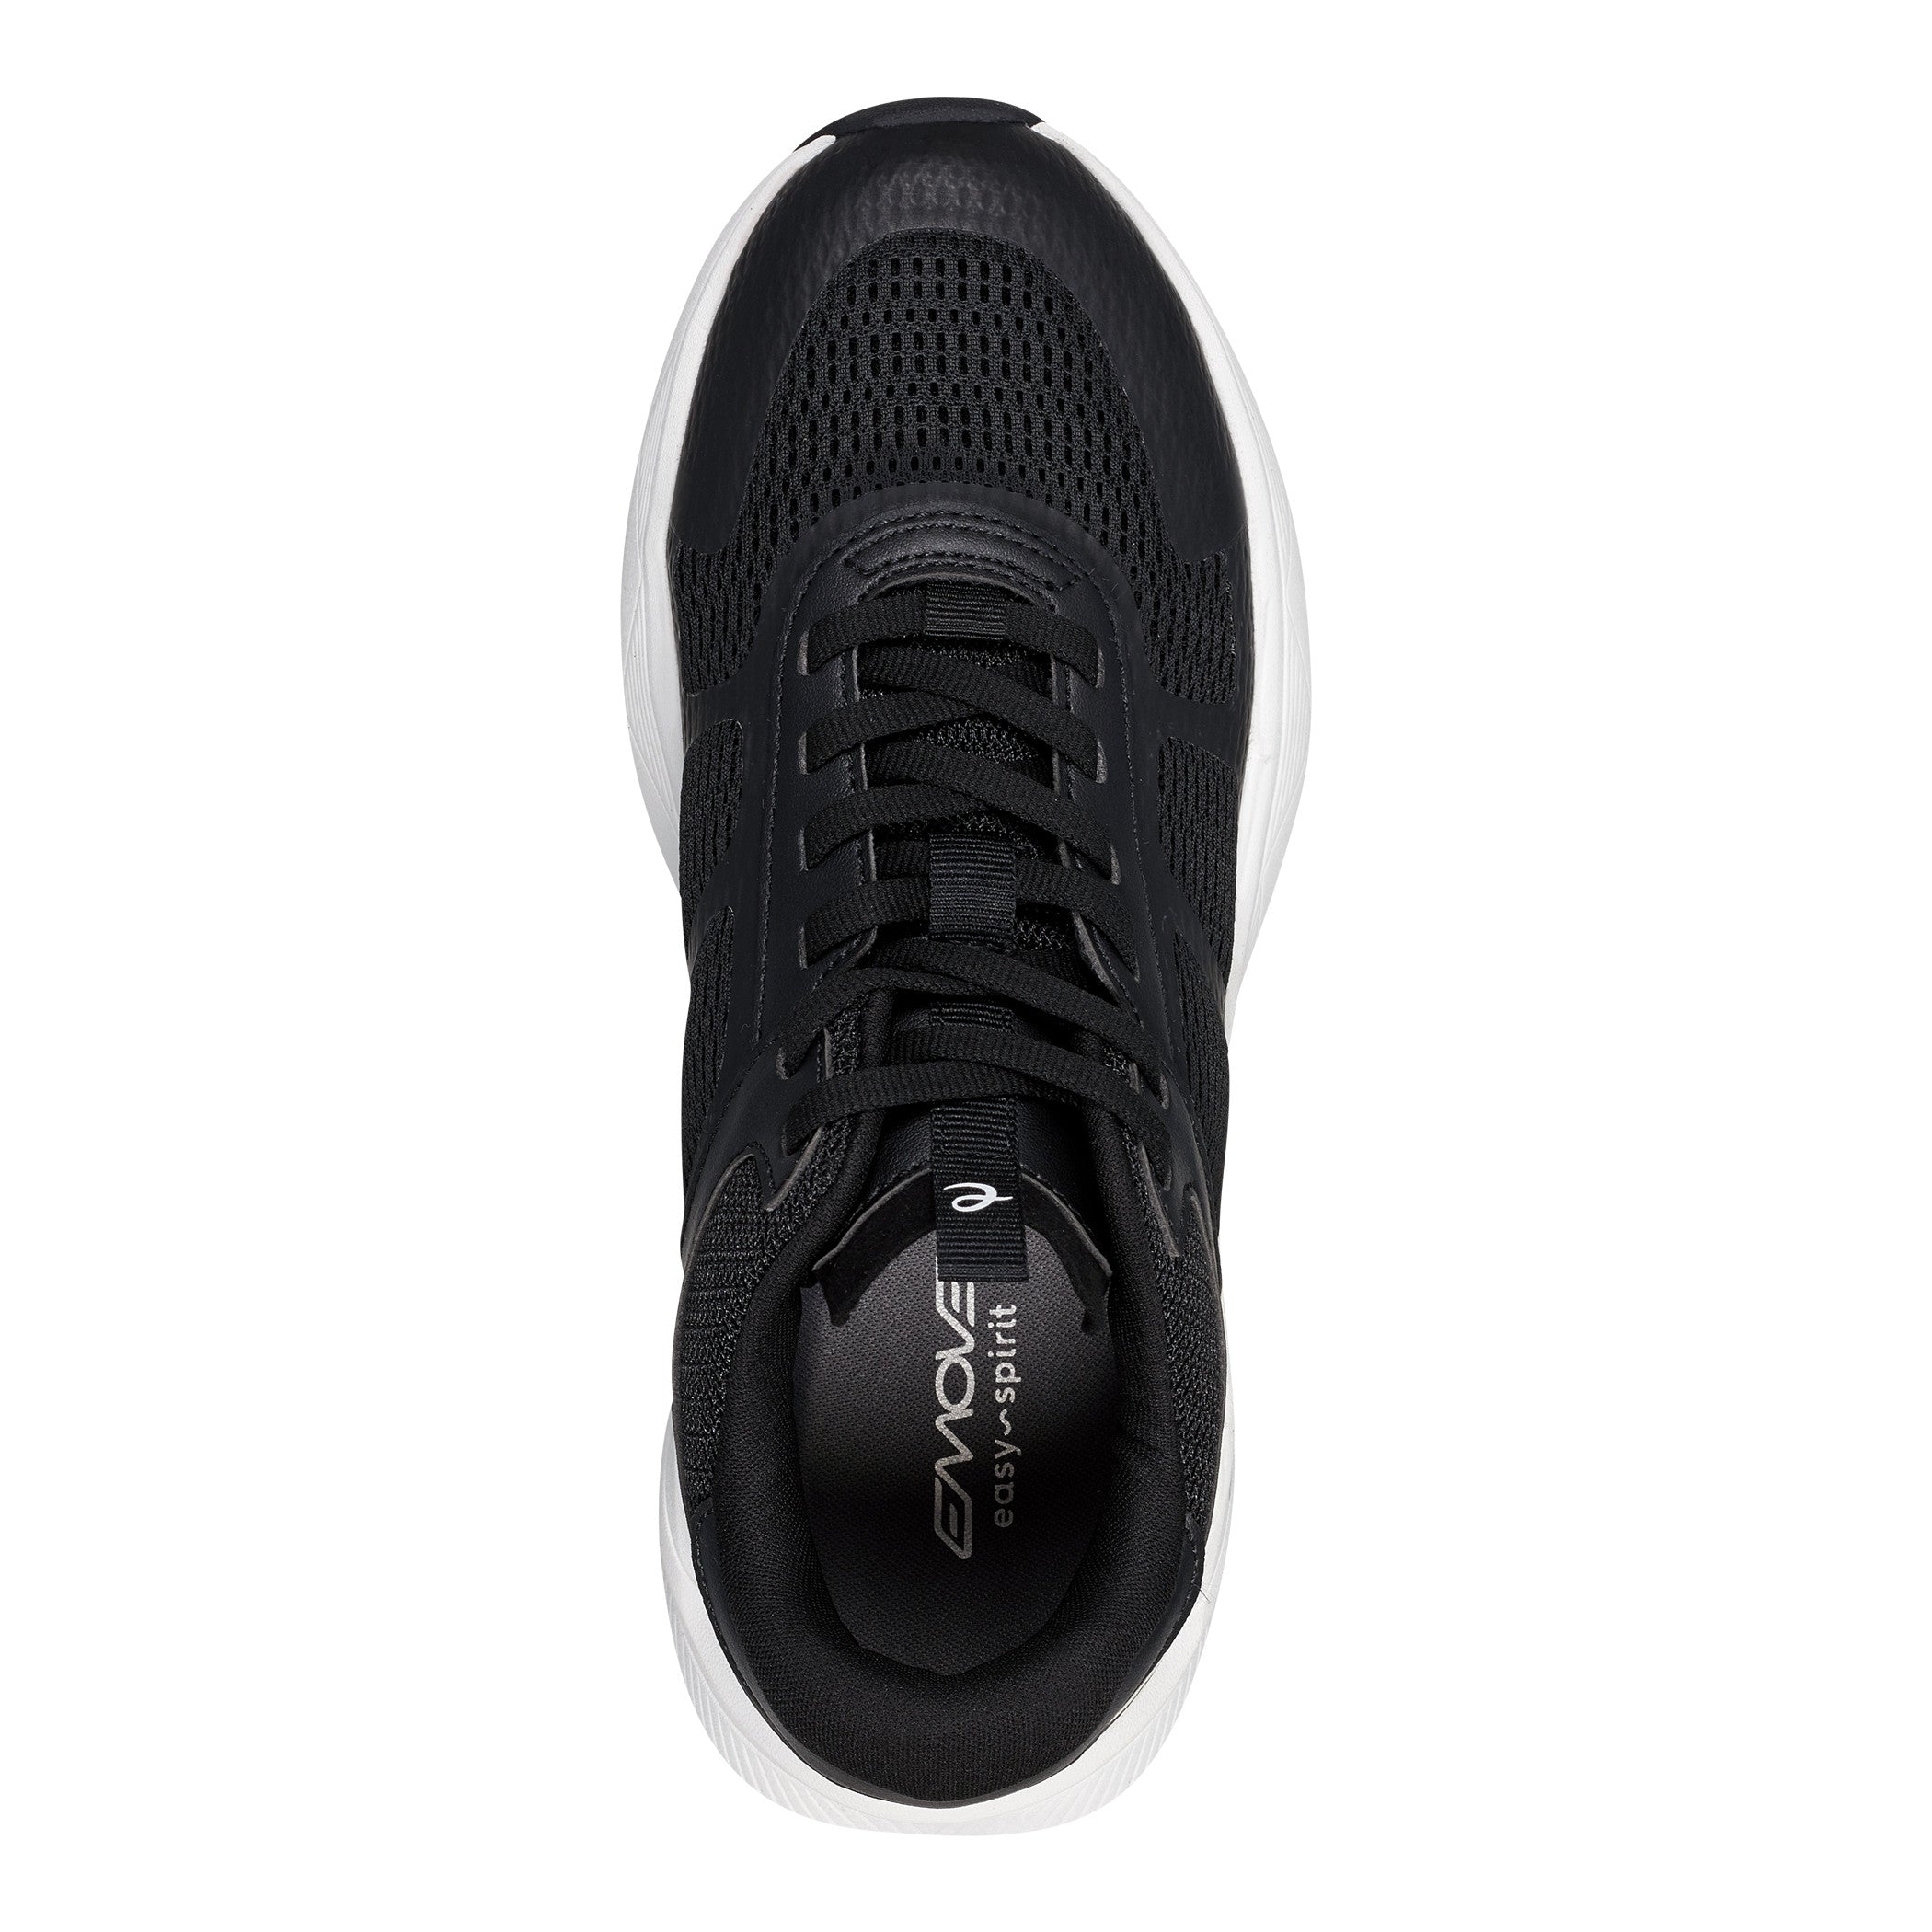 Foster EMOVE Walking Shoes